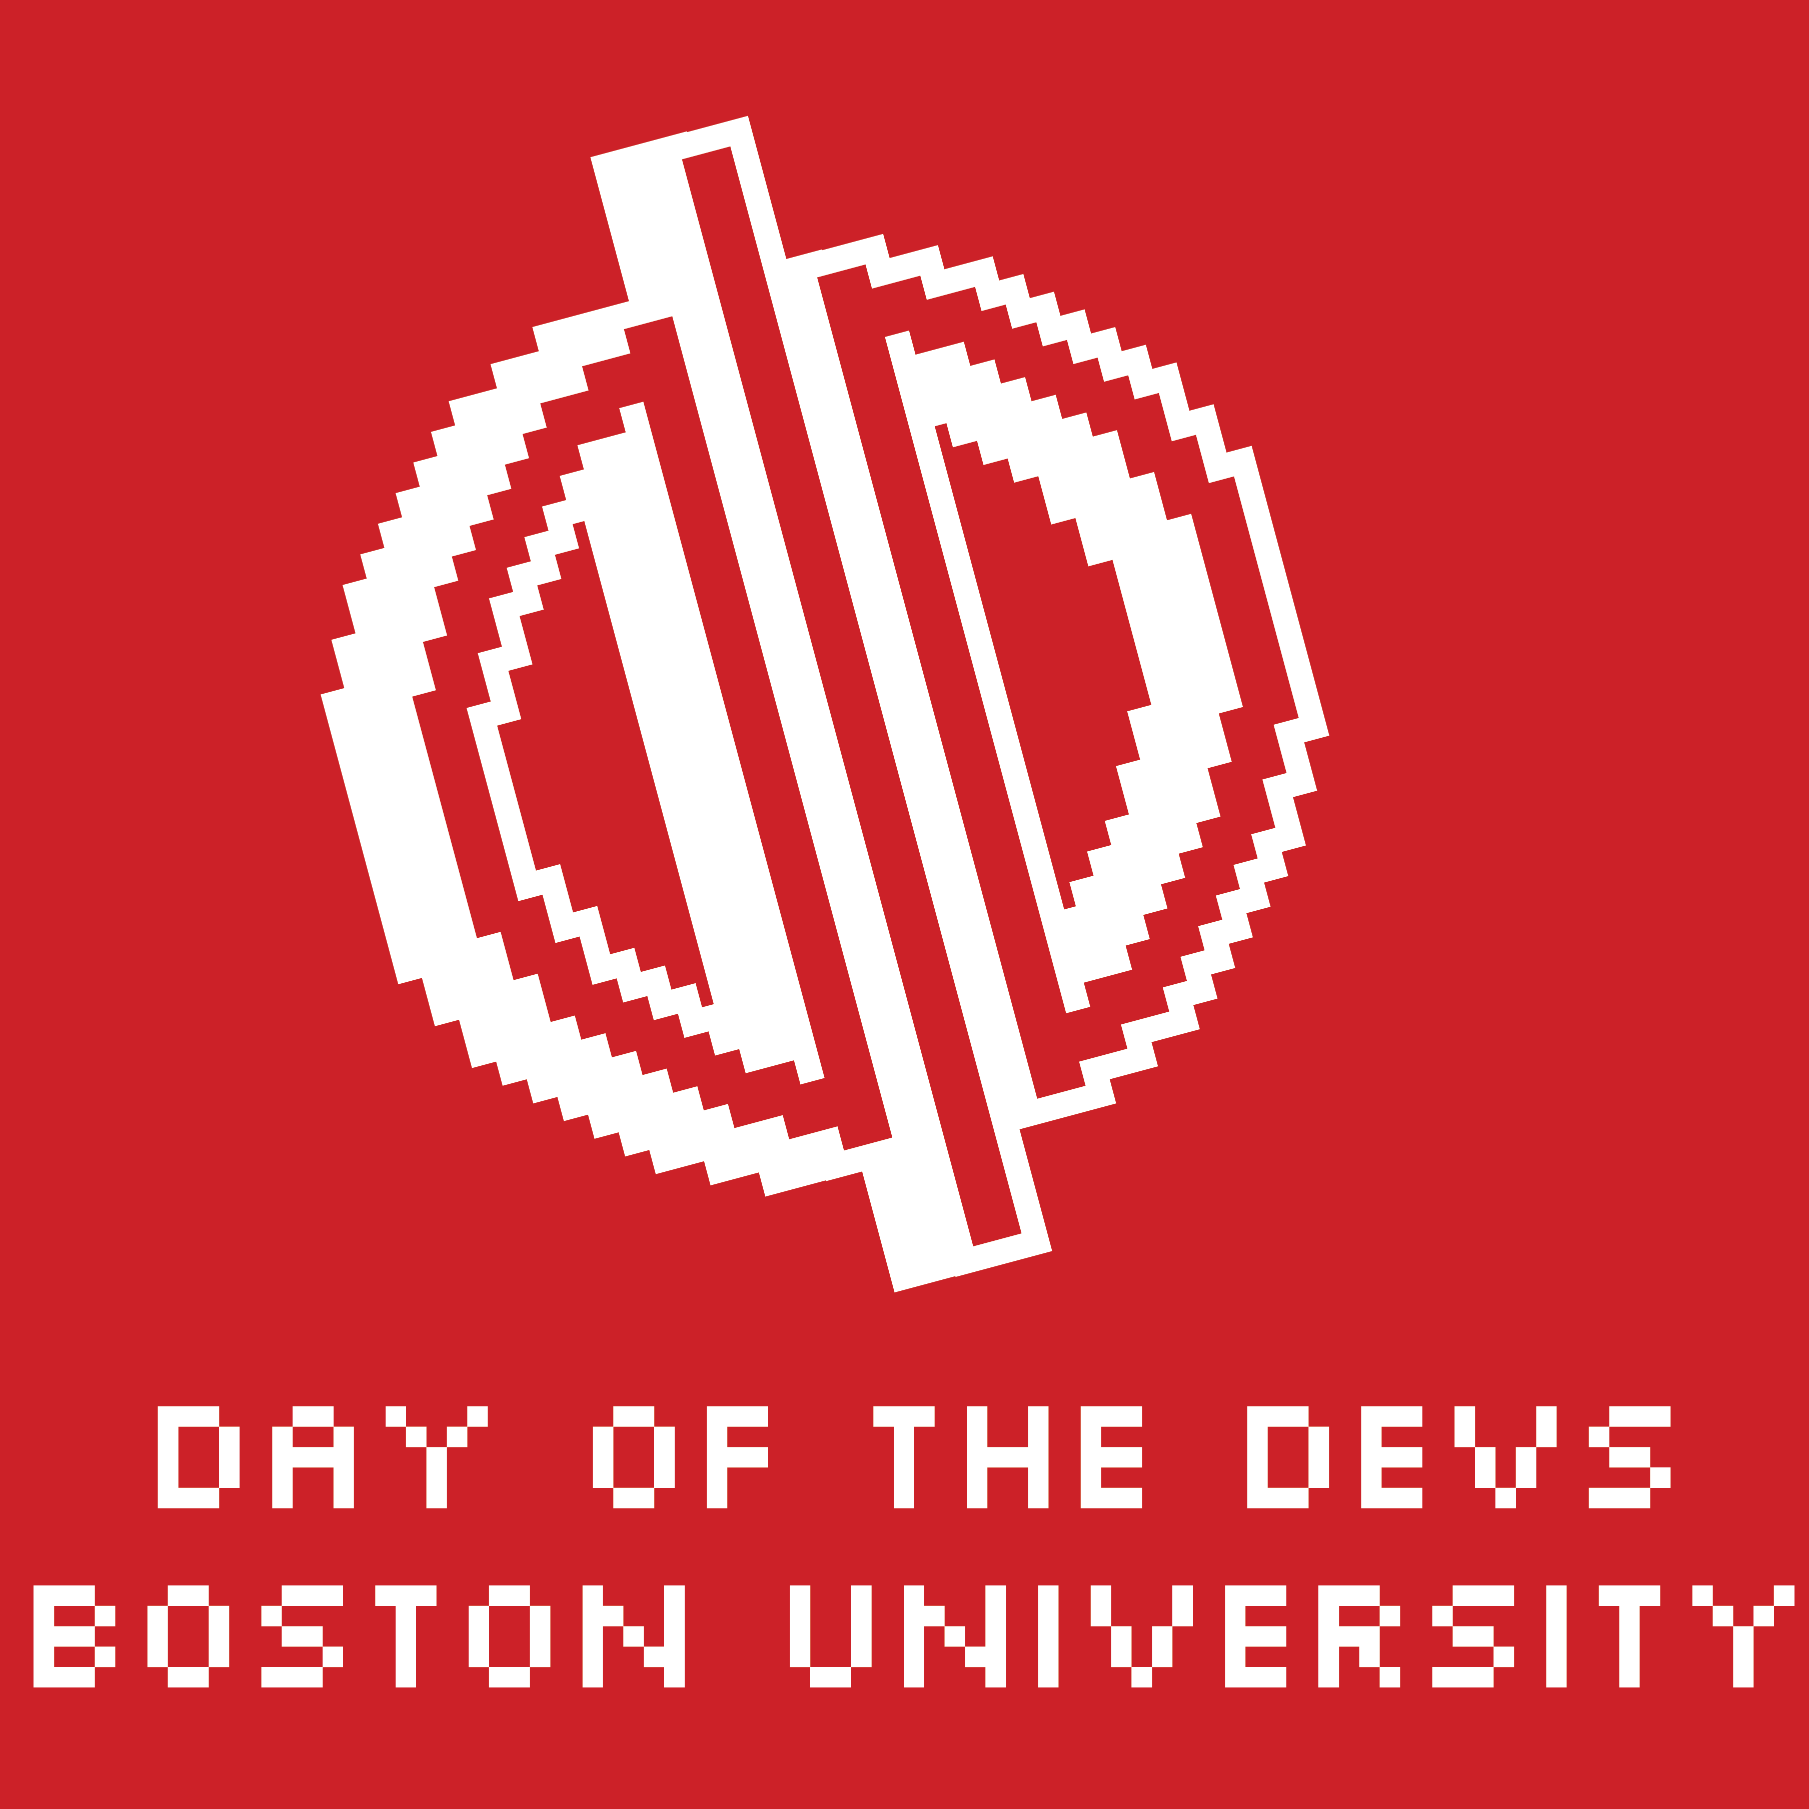 Boston University Video Game Society is a Student Organization on campus for gamers of all kinds. Come play with us!